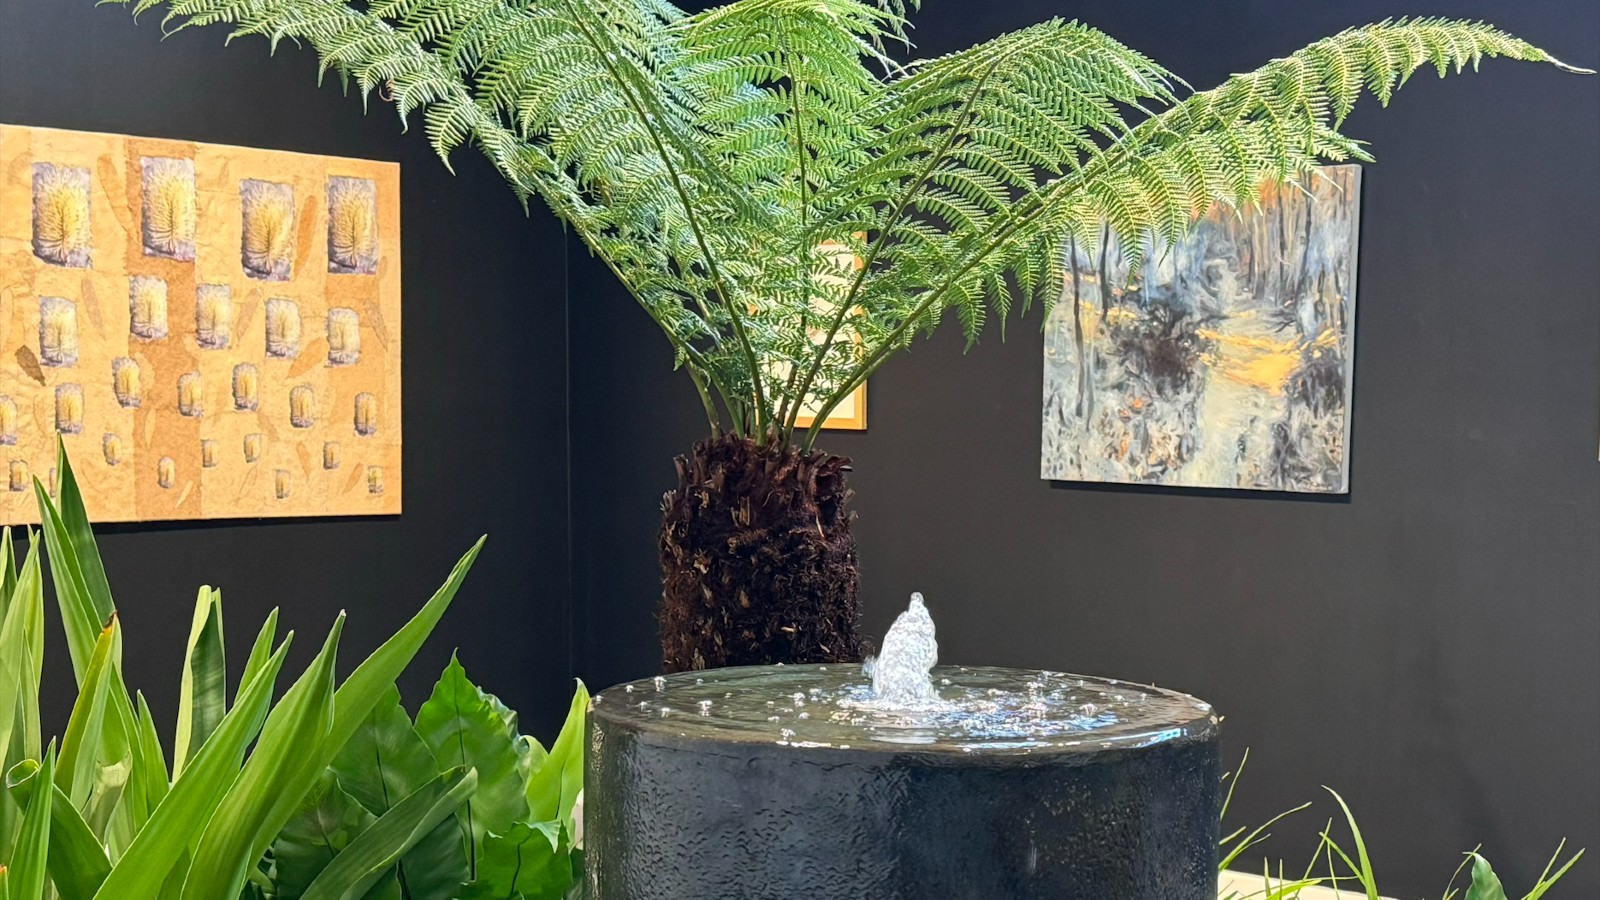 Plants and a water feature in a gallery space.